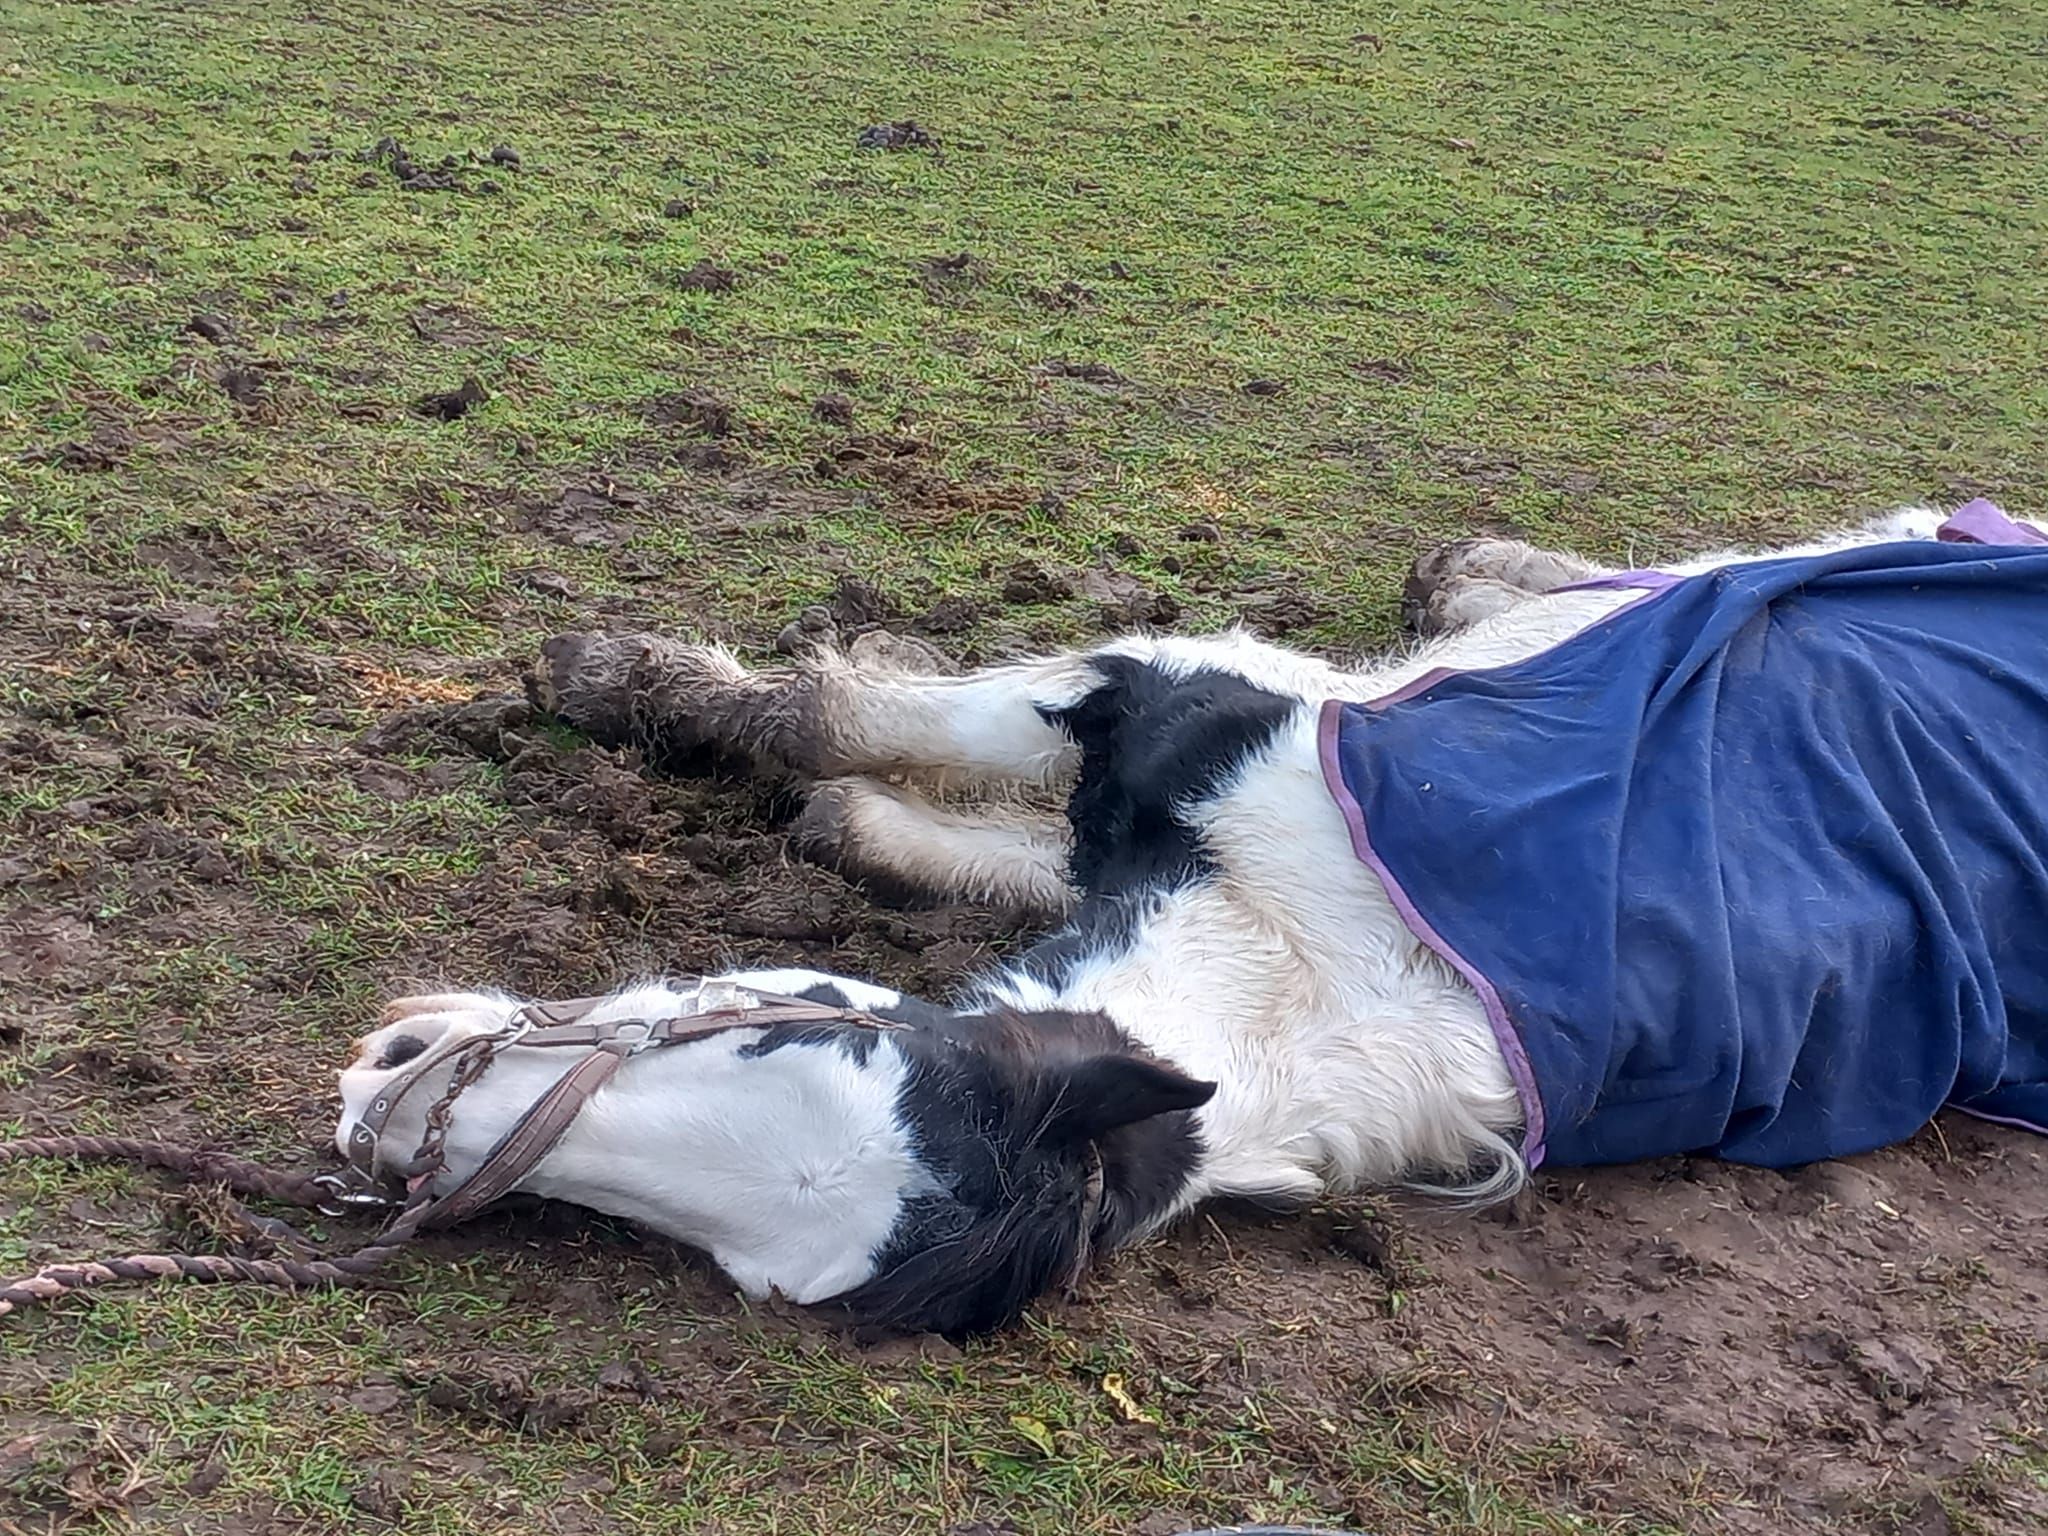 Murphy a horse, alive on his side